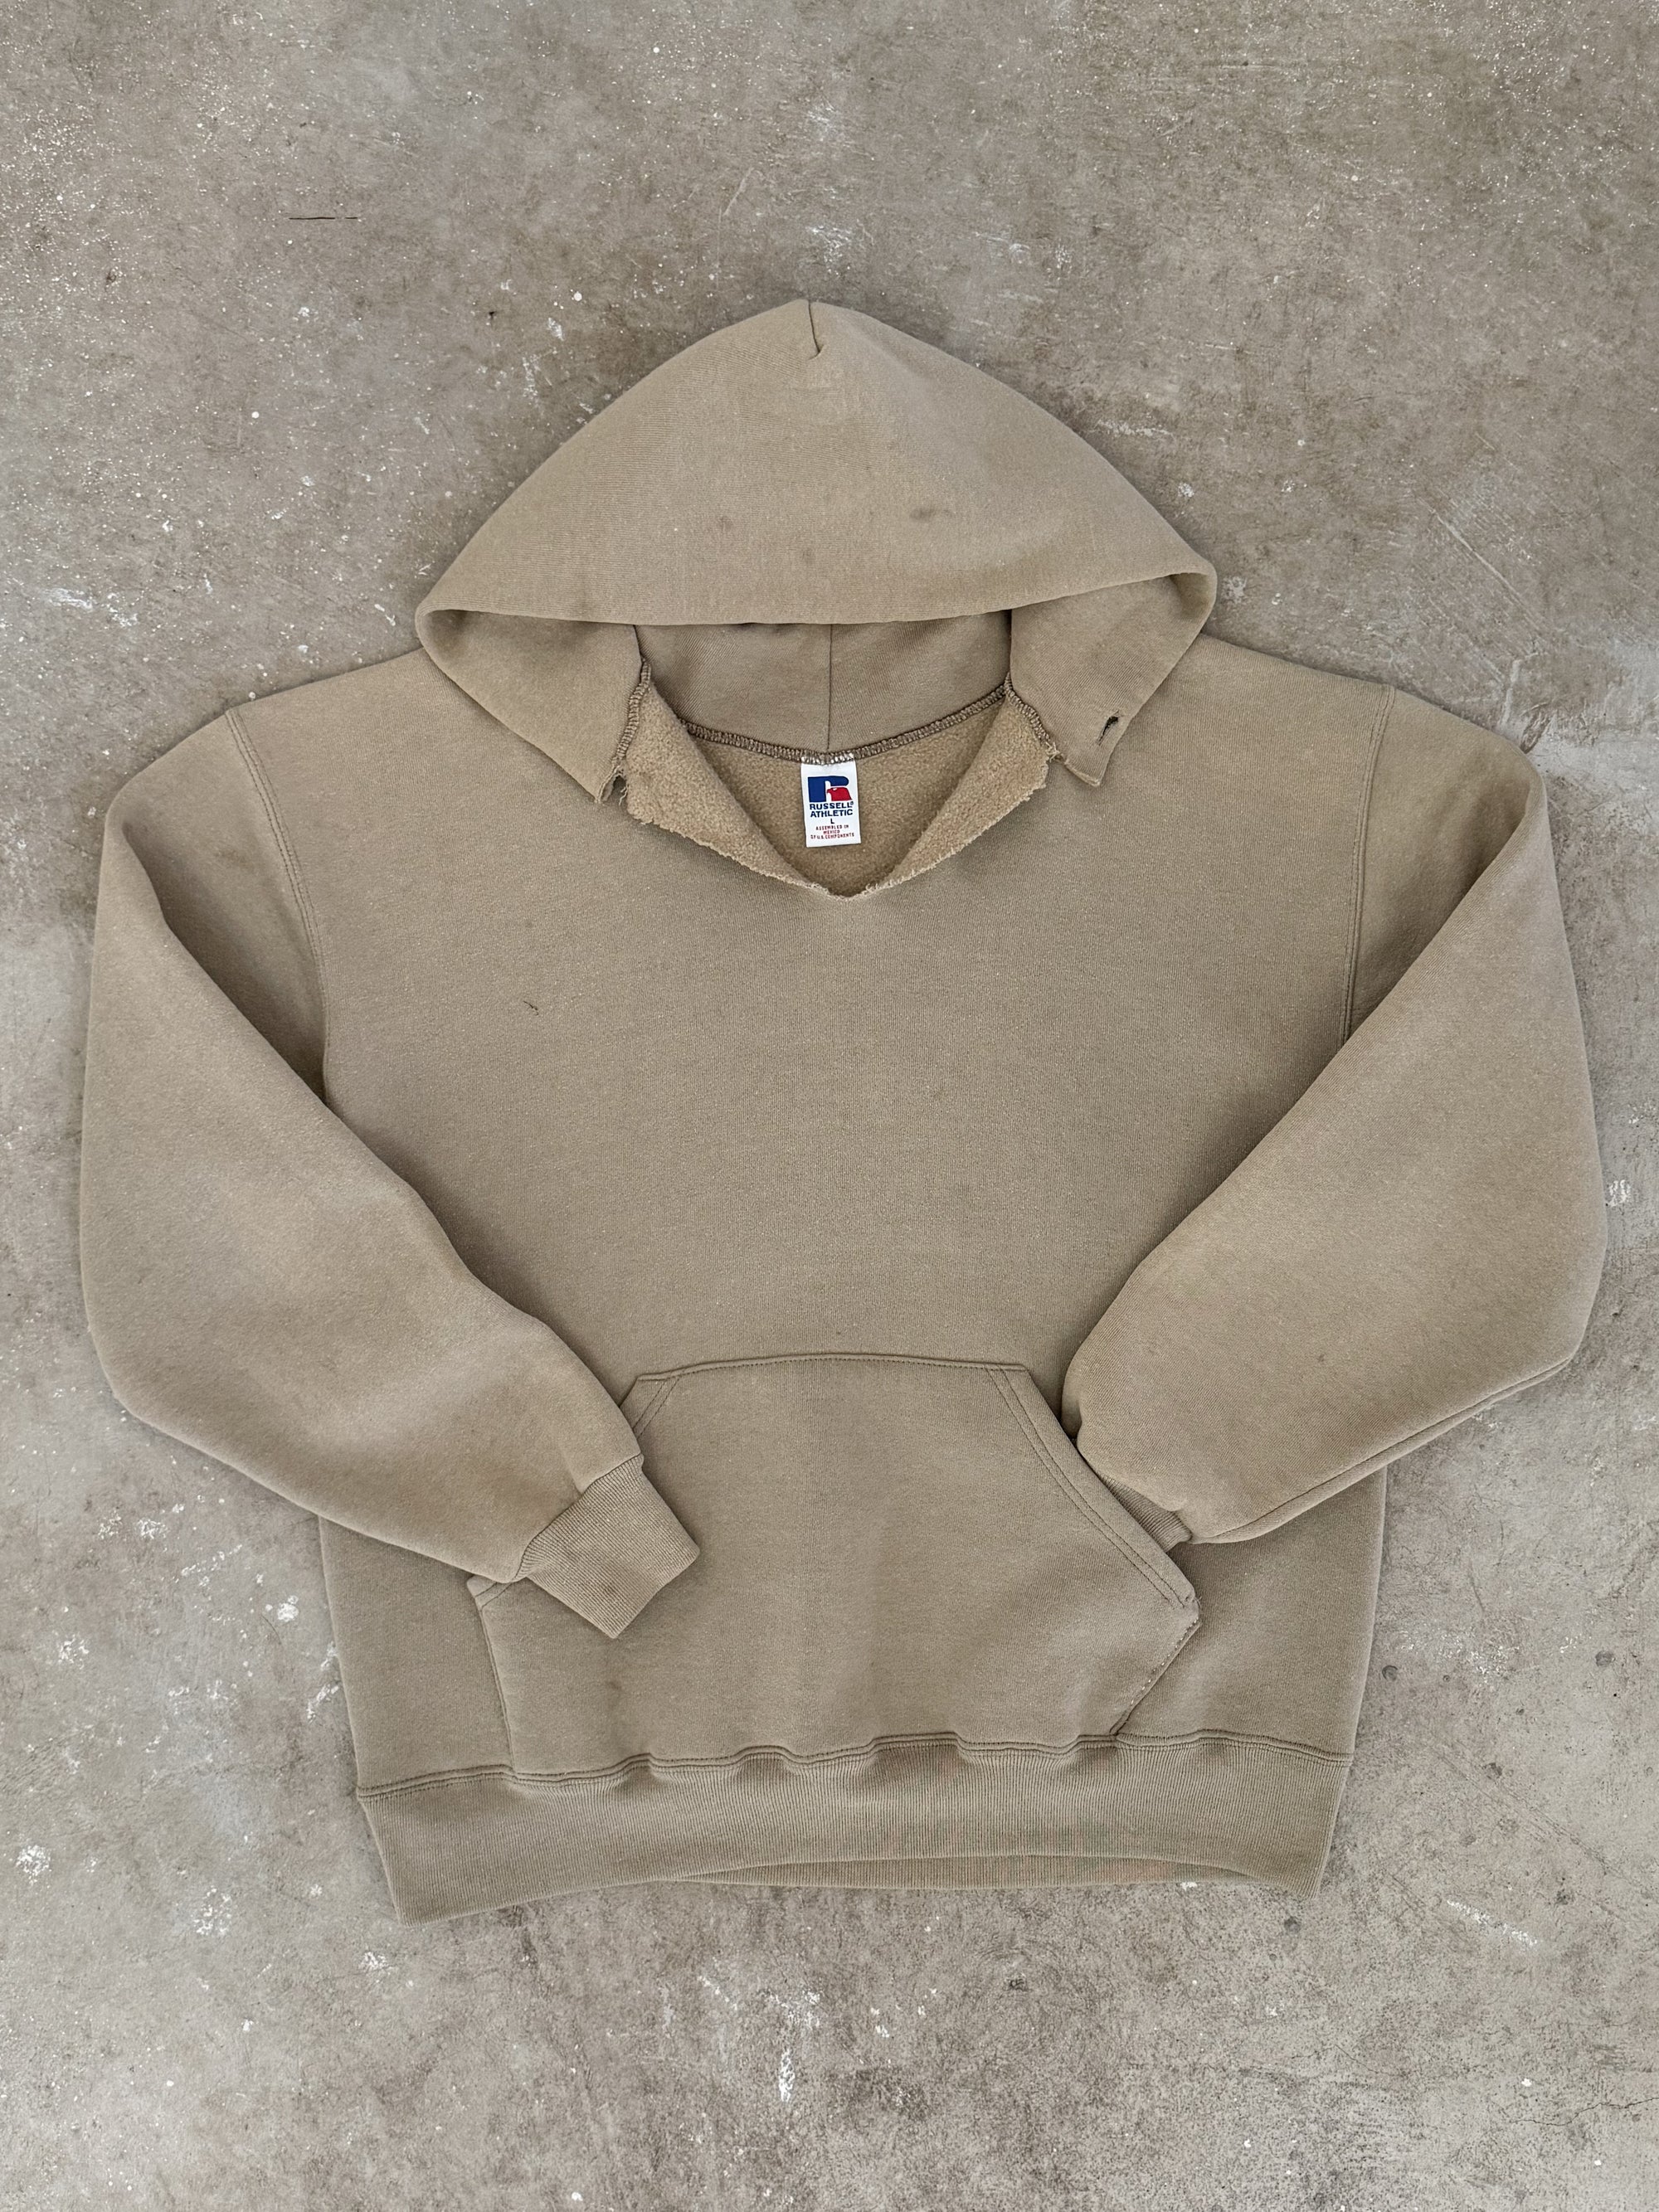 Early 00s Russell Distressed Sand Beige Hoodie (M/L)